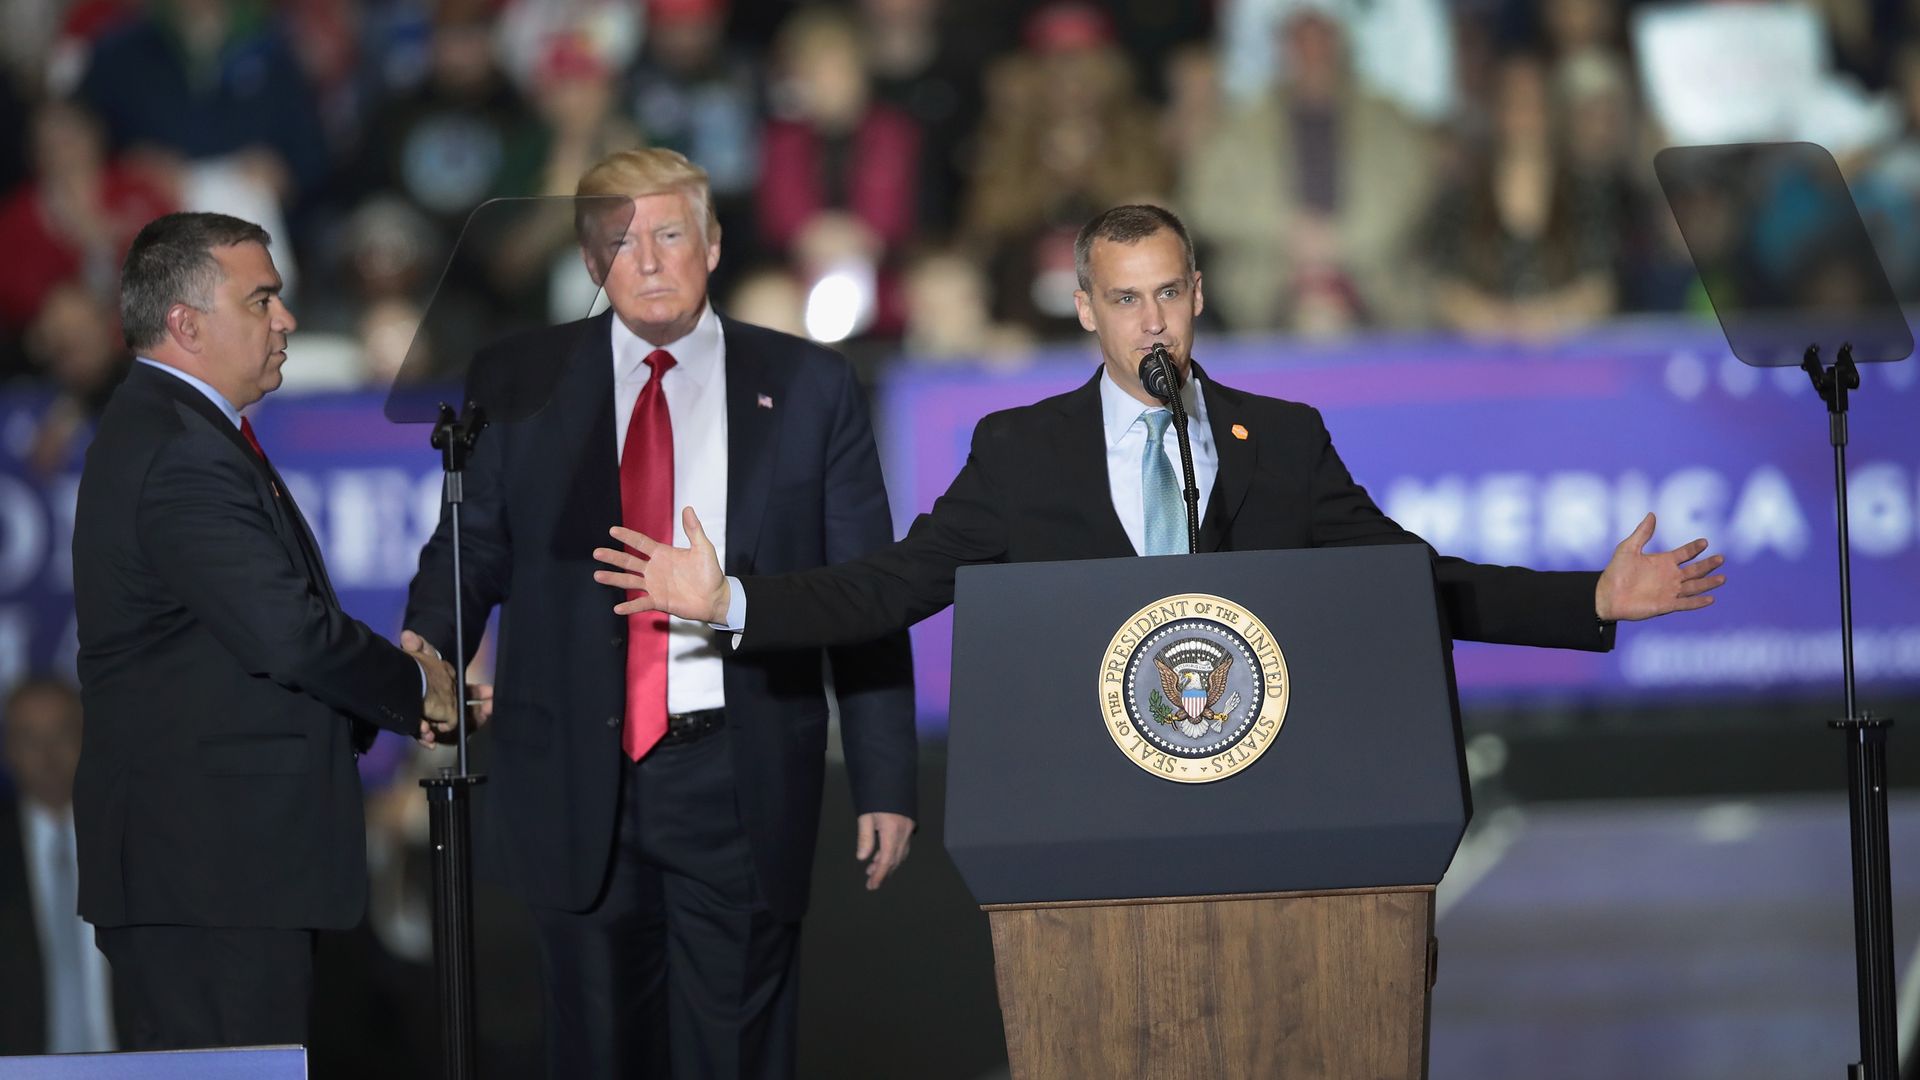 Corey Lewandowski is seen with President Trump at a political rally in 2018.